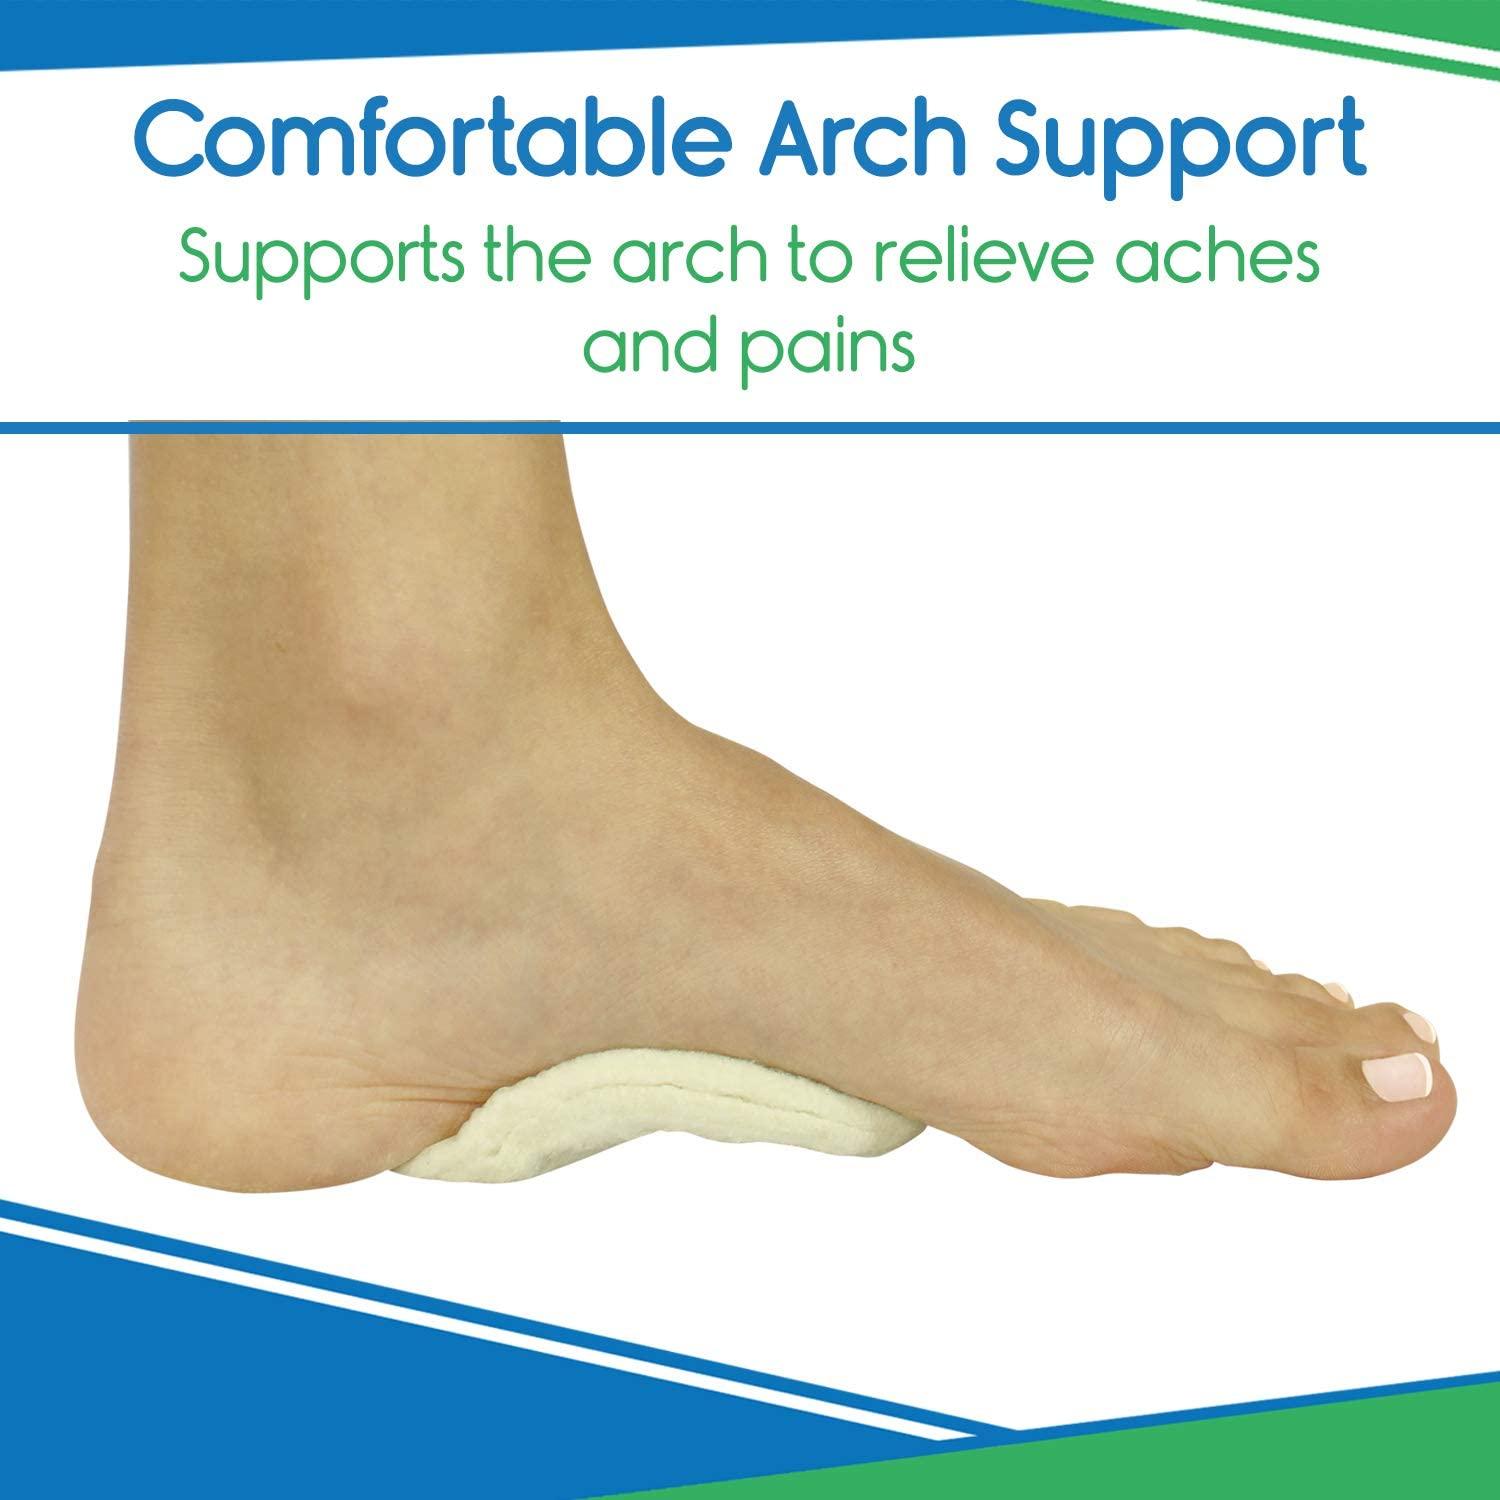 Women's High Heels Arch Support Gel Cushion Comfort Insoles - FootHealth.com